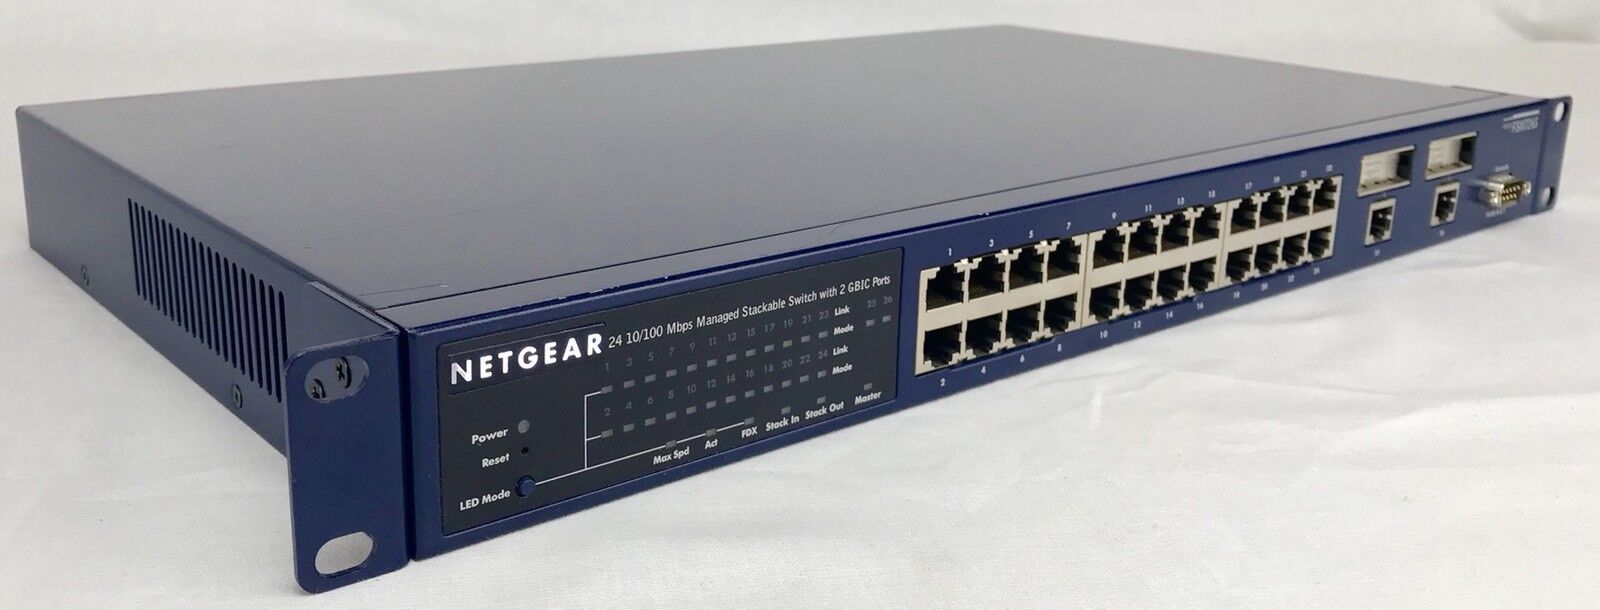 Netgear FSM726S 24 Port 10/100 Managed Stackable Switch 2 GBIC Ports Rack Ears